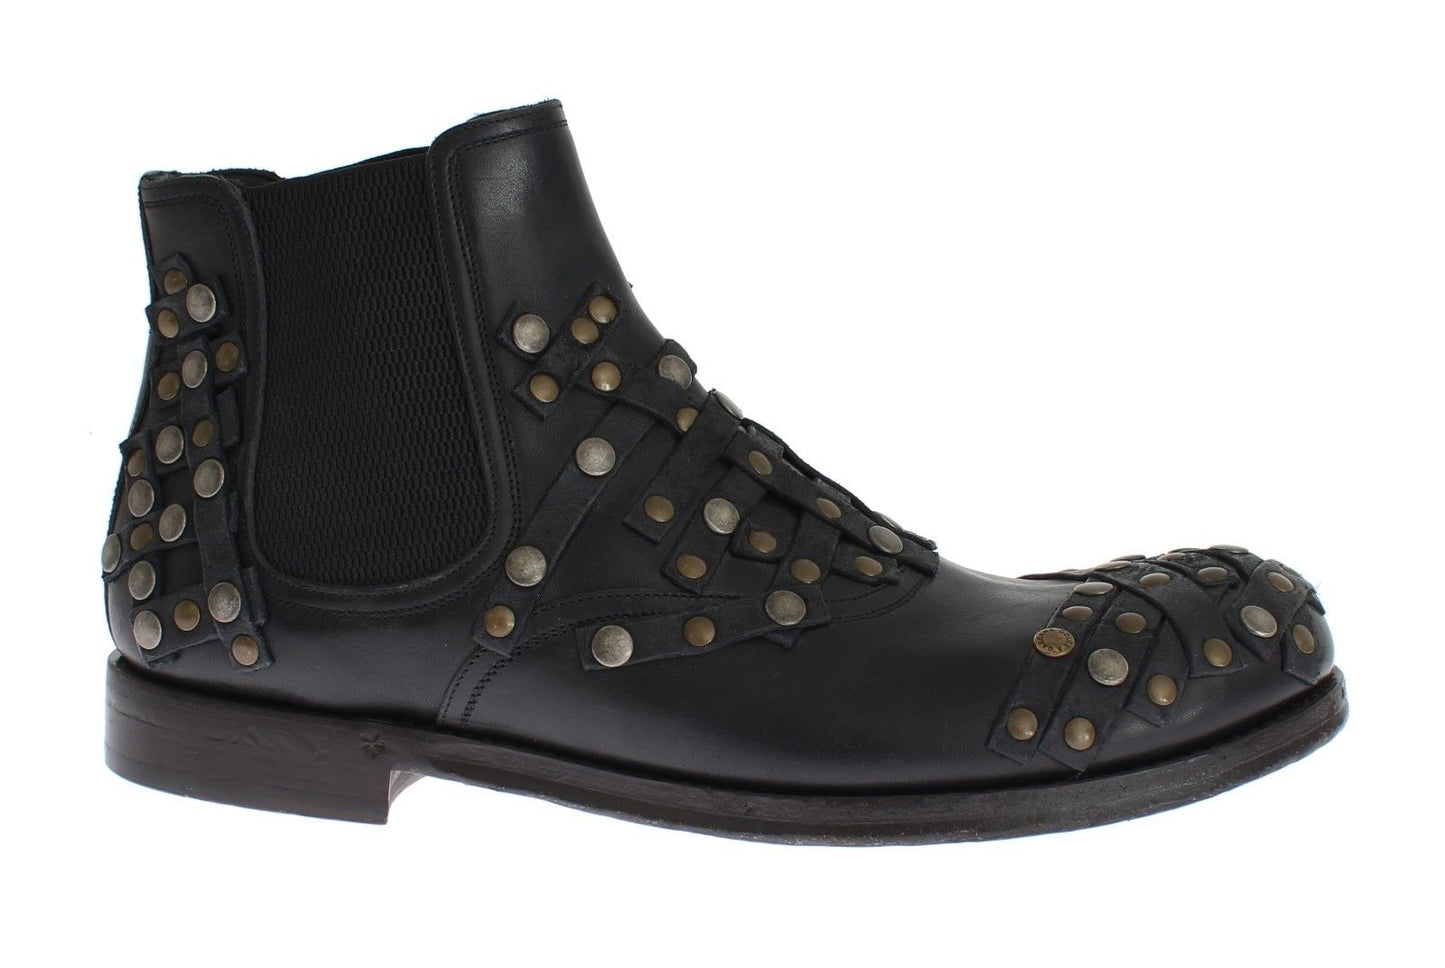 Black Leather Gold Studded Shoes Boots